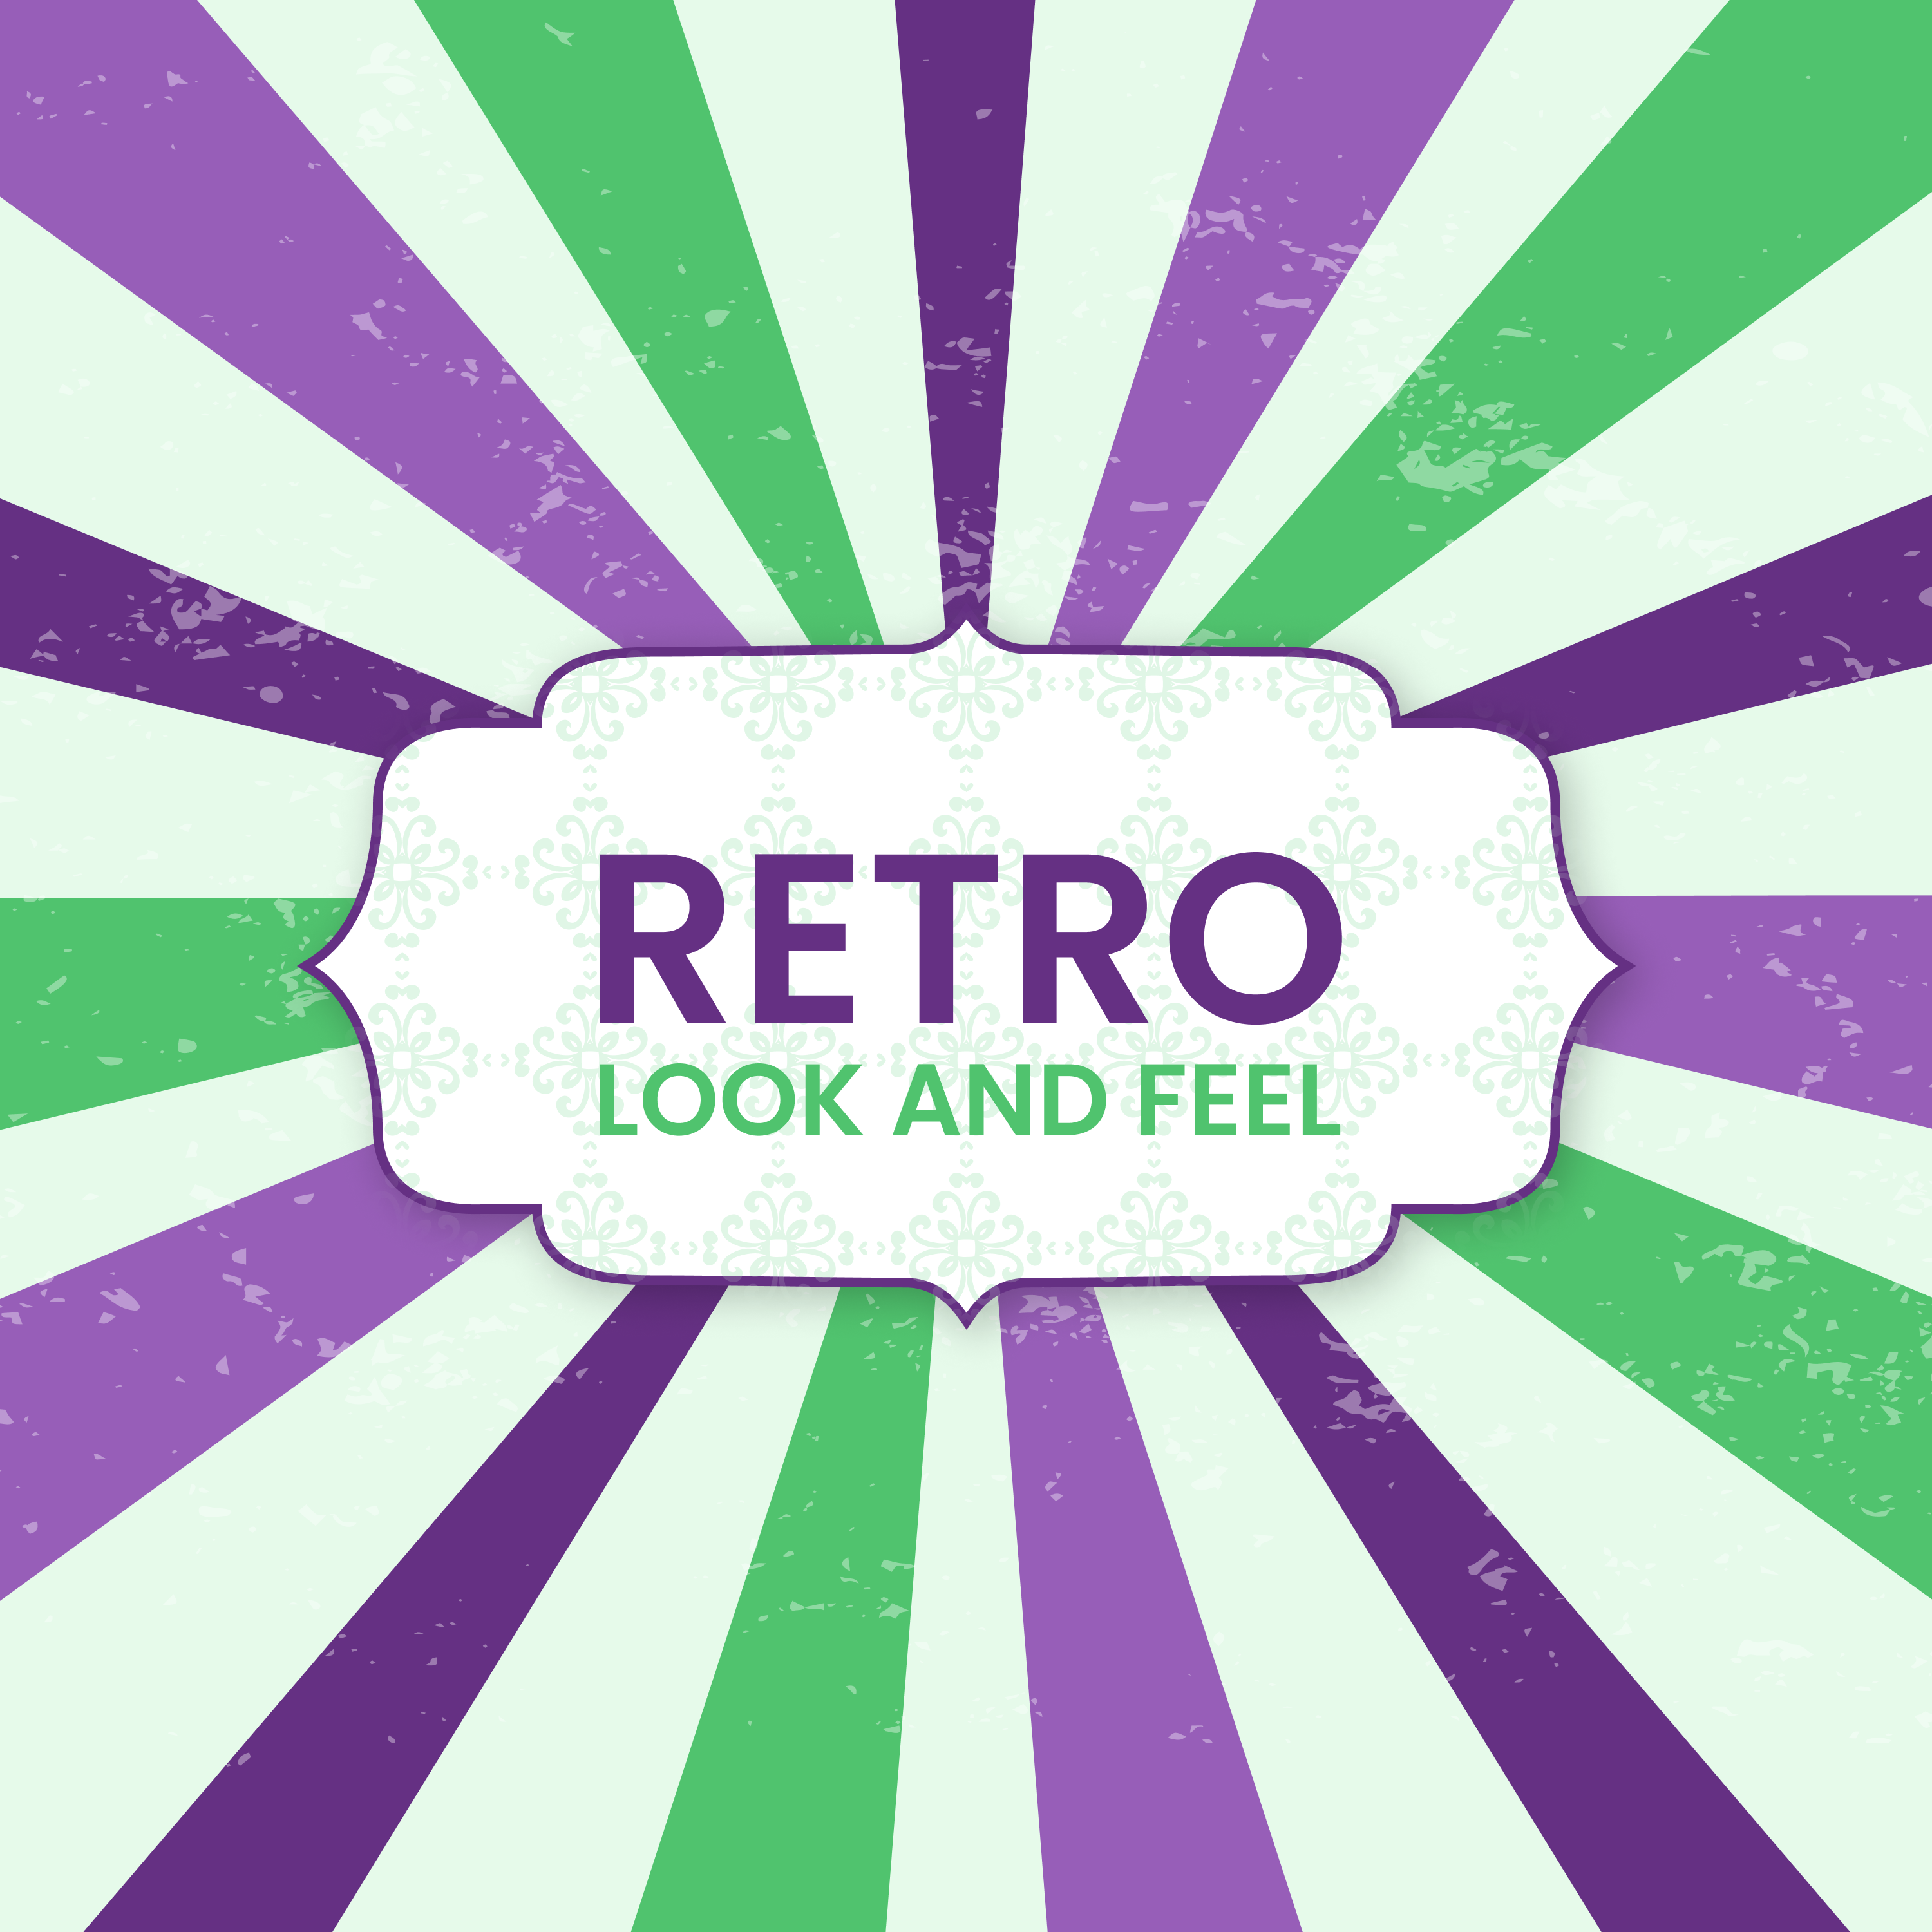 Retro Look and Feel